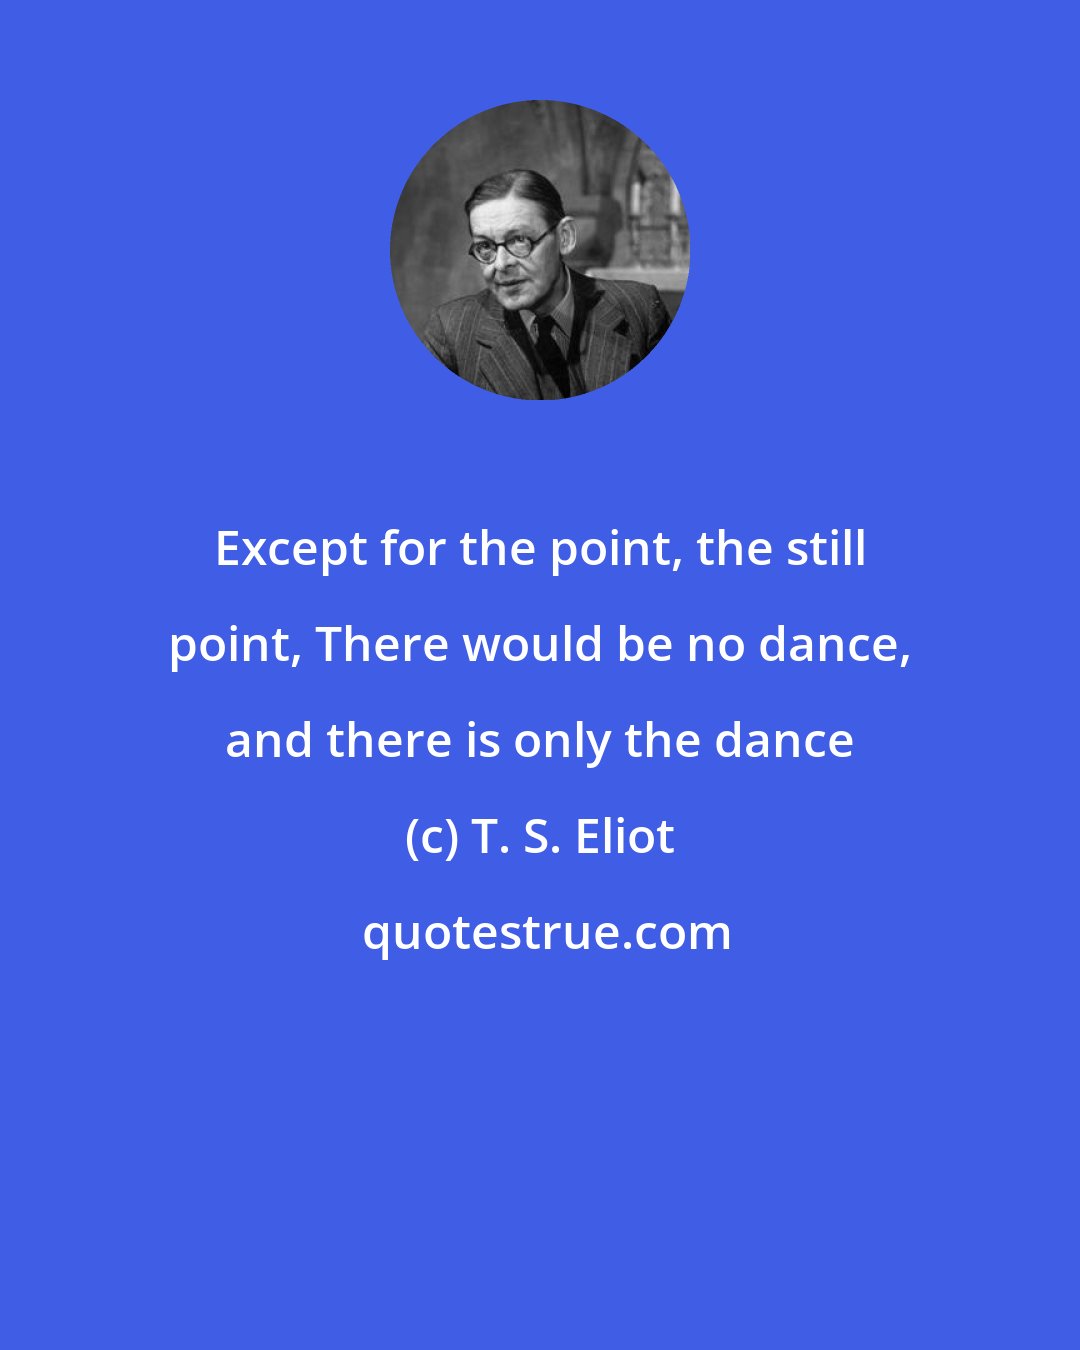 T. S. Eliot: Except for the point, the still point, There would be no dance, and there is only the dance